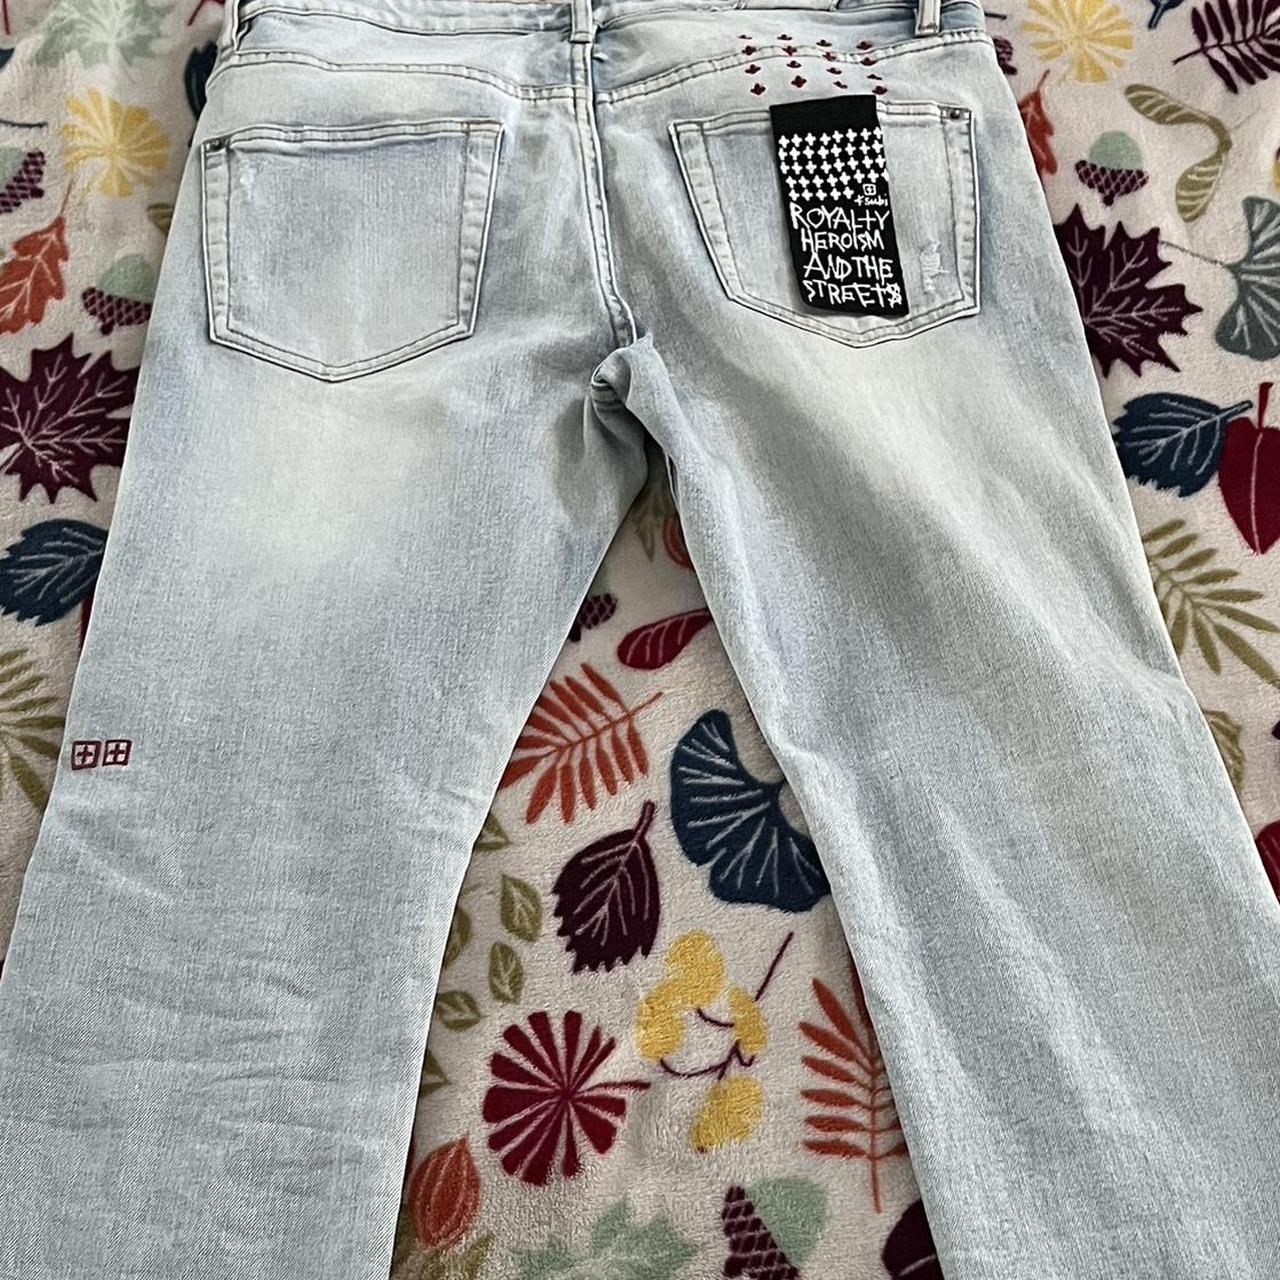 J. Brand Made in USA Distressed Aiden Jeans 5 Pocket - Depop